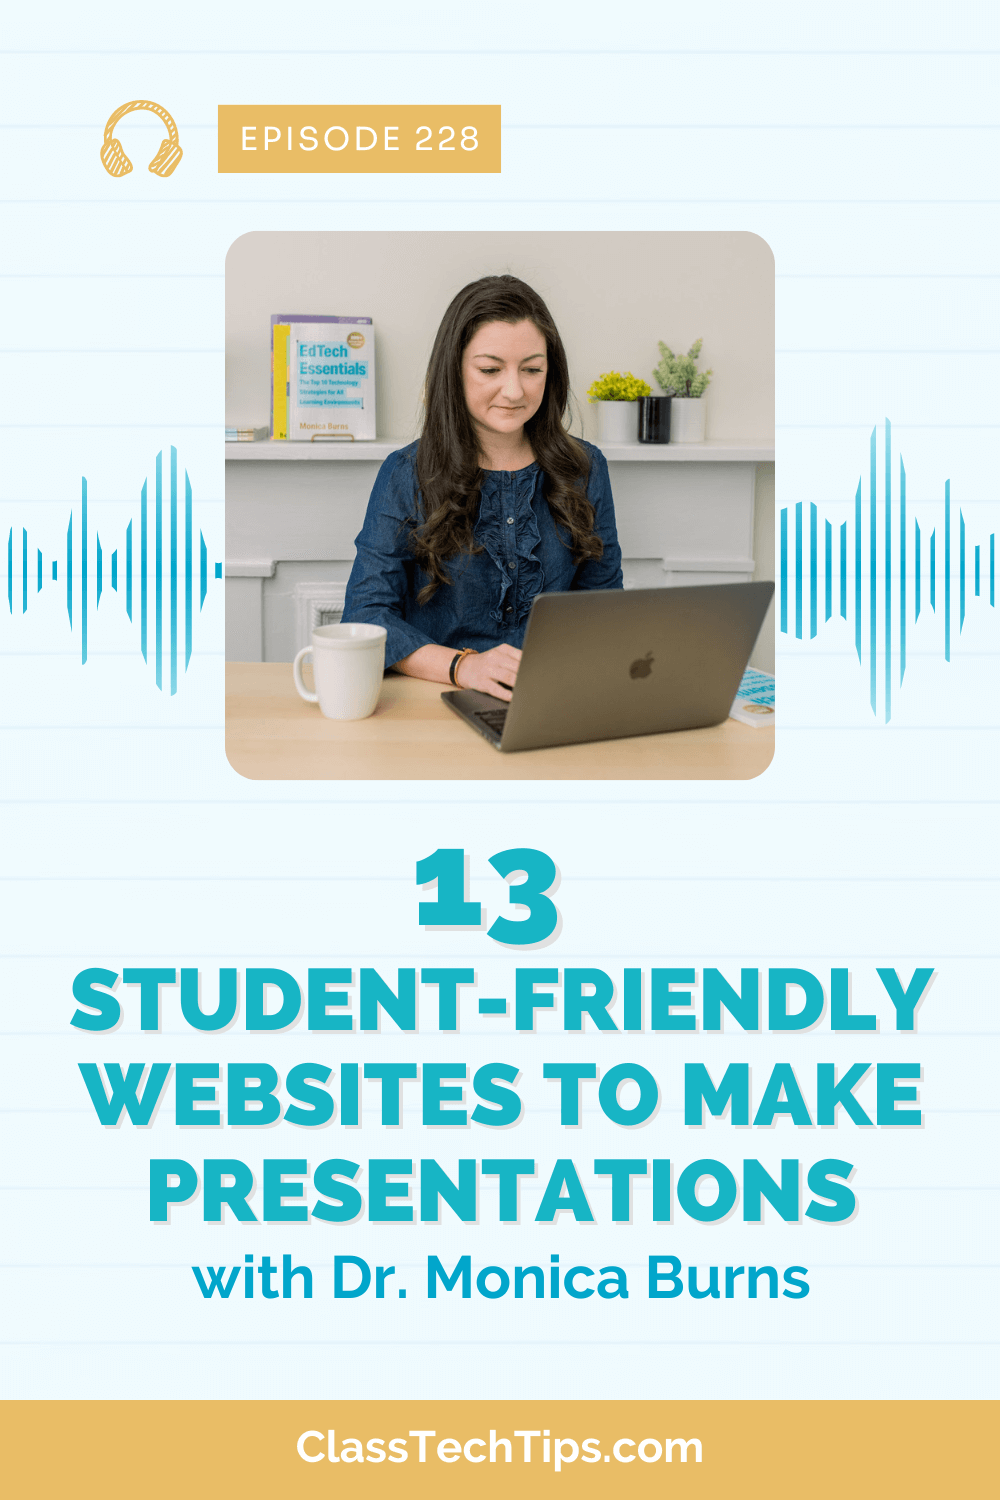 Featured image for podcast episode, displaying the podcast logo and the topic of exploring 13 student-friendly websites for presentations.